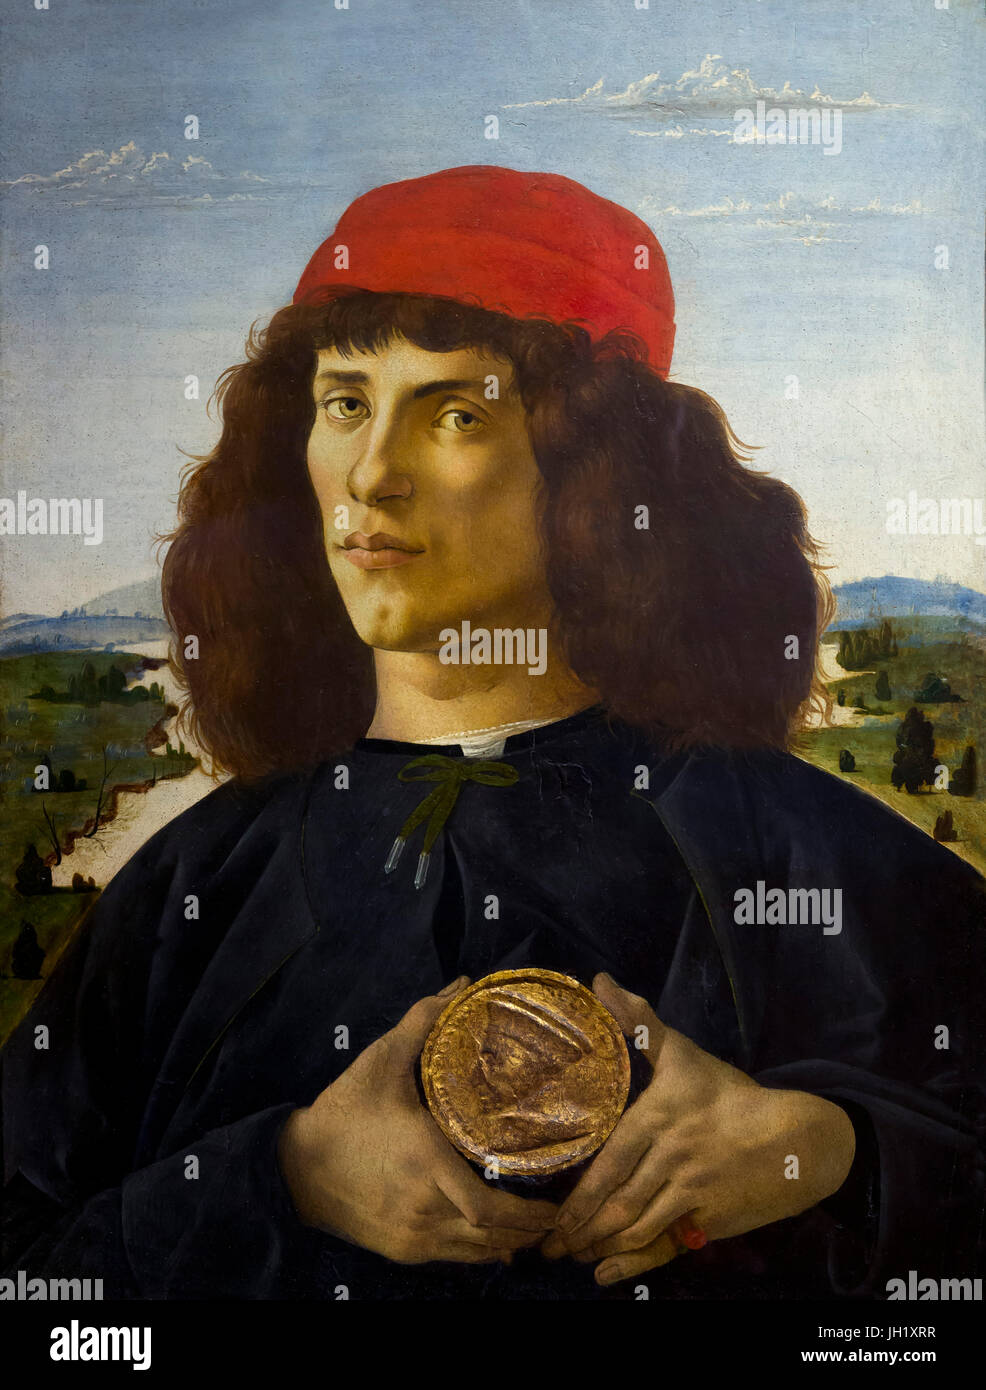 Portrait of a Man with the Medal of Cosimo de Medici the Elder, by Sandro Botticelli, circa 1475, Uffizi Gallery, Florence, Tuscany, Italy, Europe Stock Photo